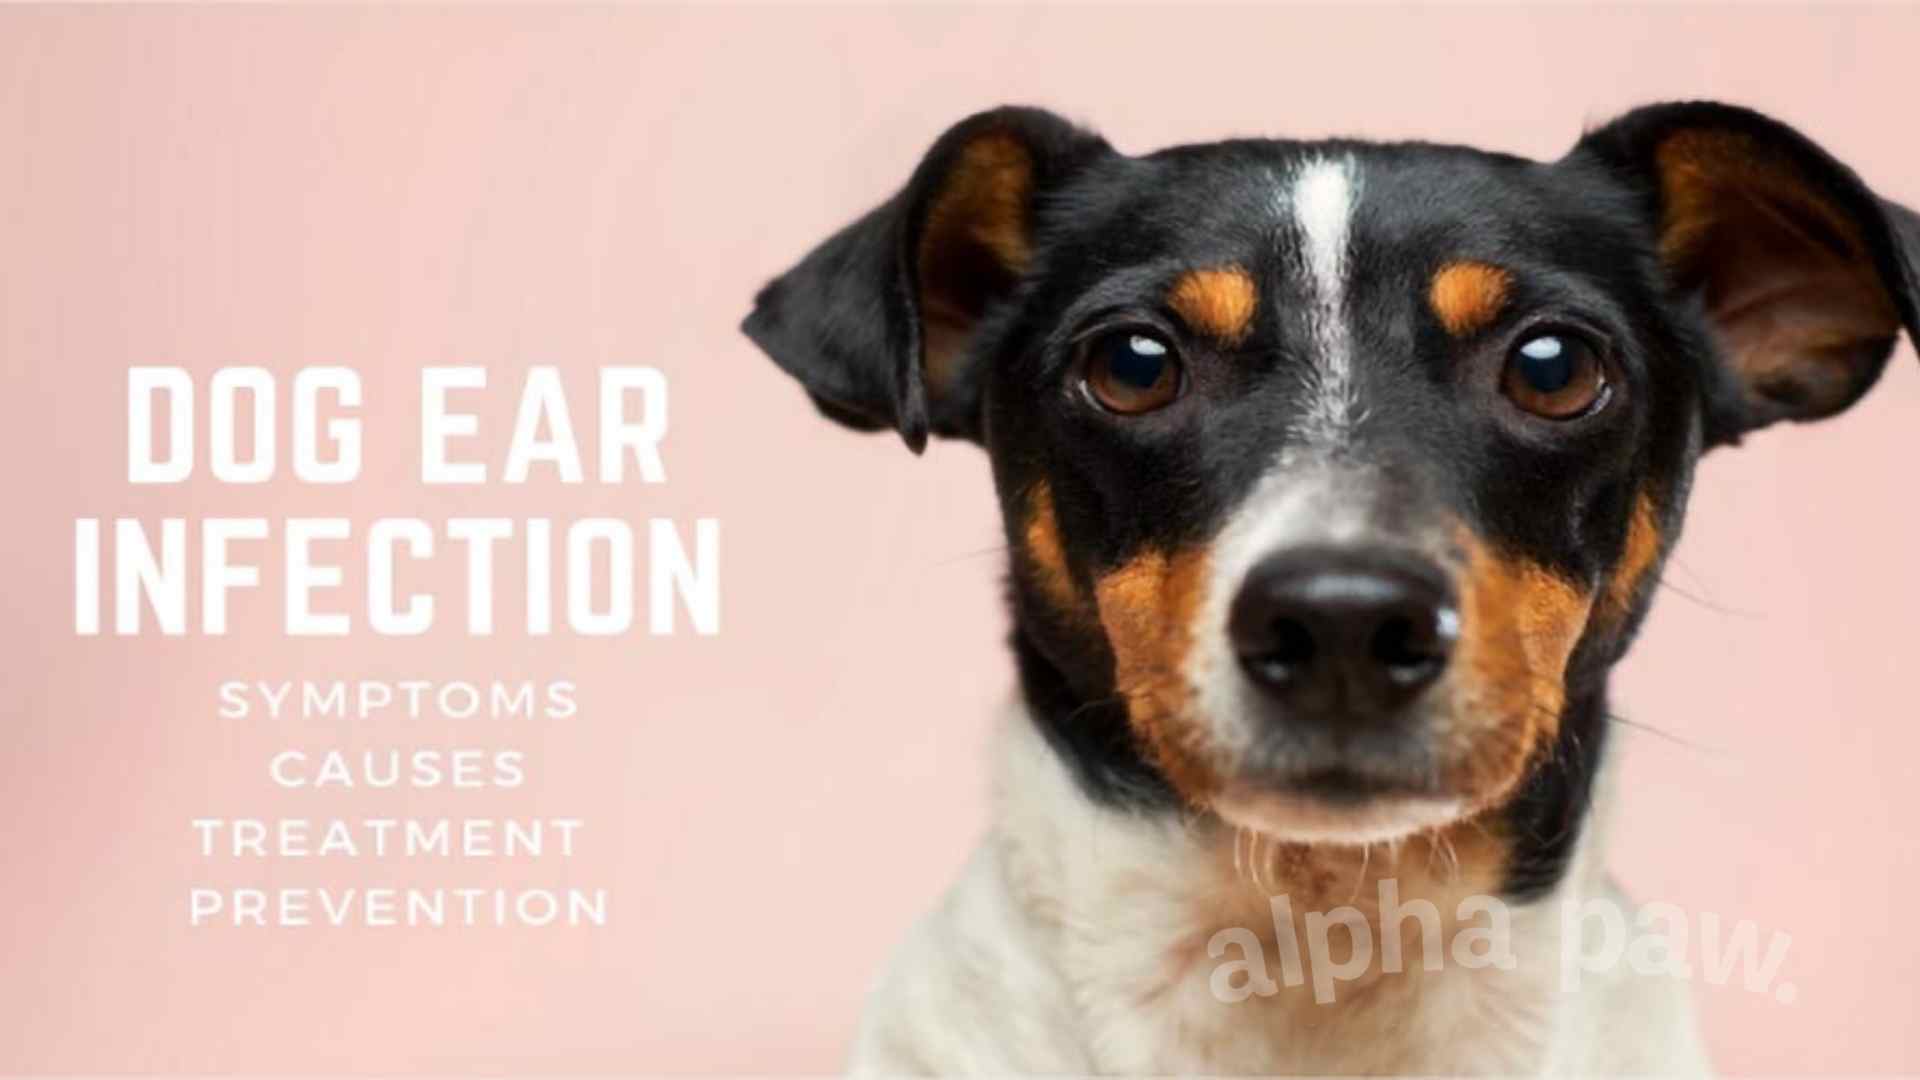 Dog Ear Infection: Symptoms, Causes, Treatment & Prevention